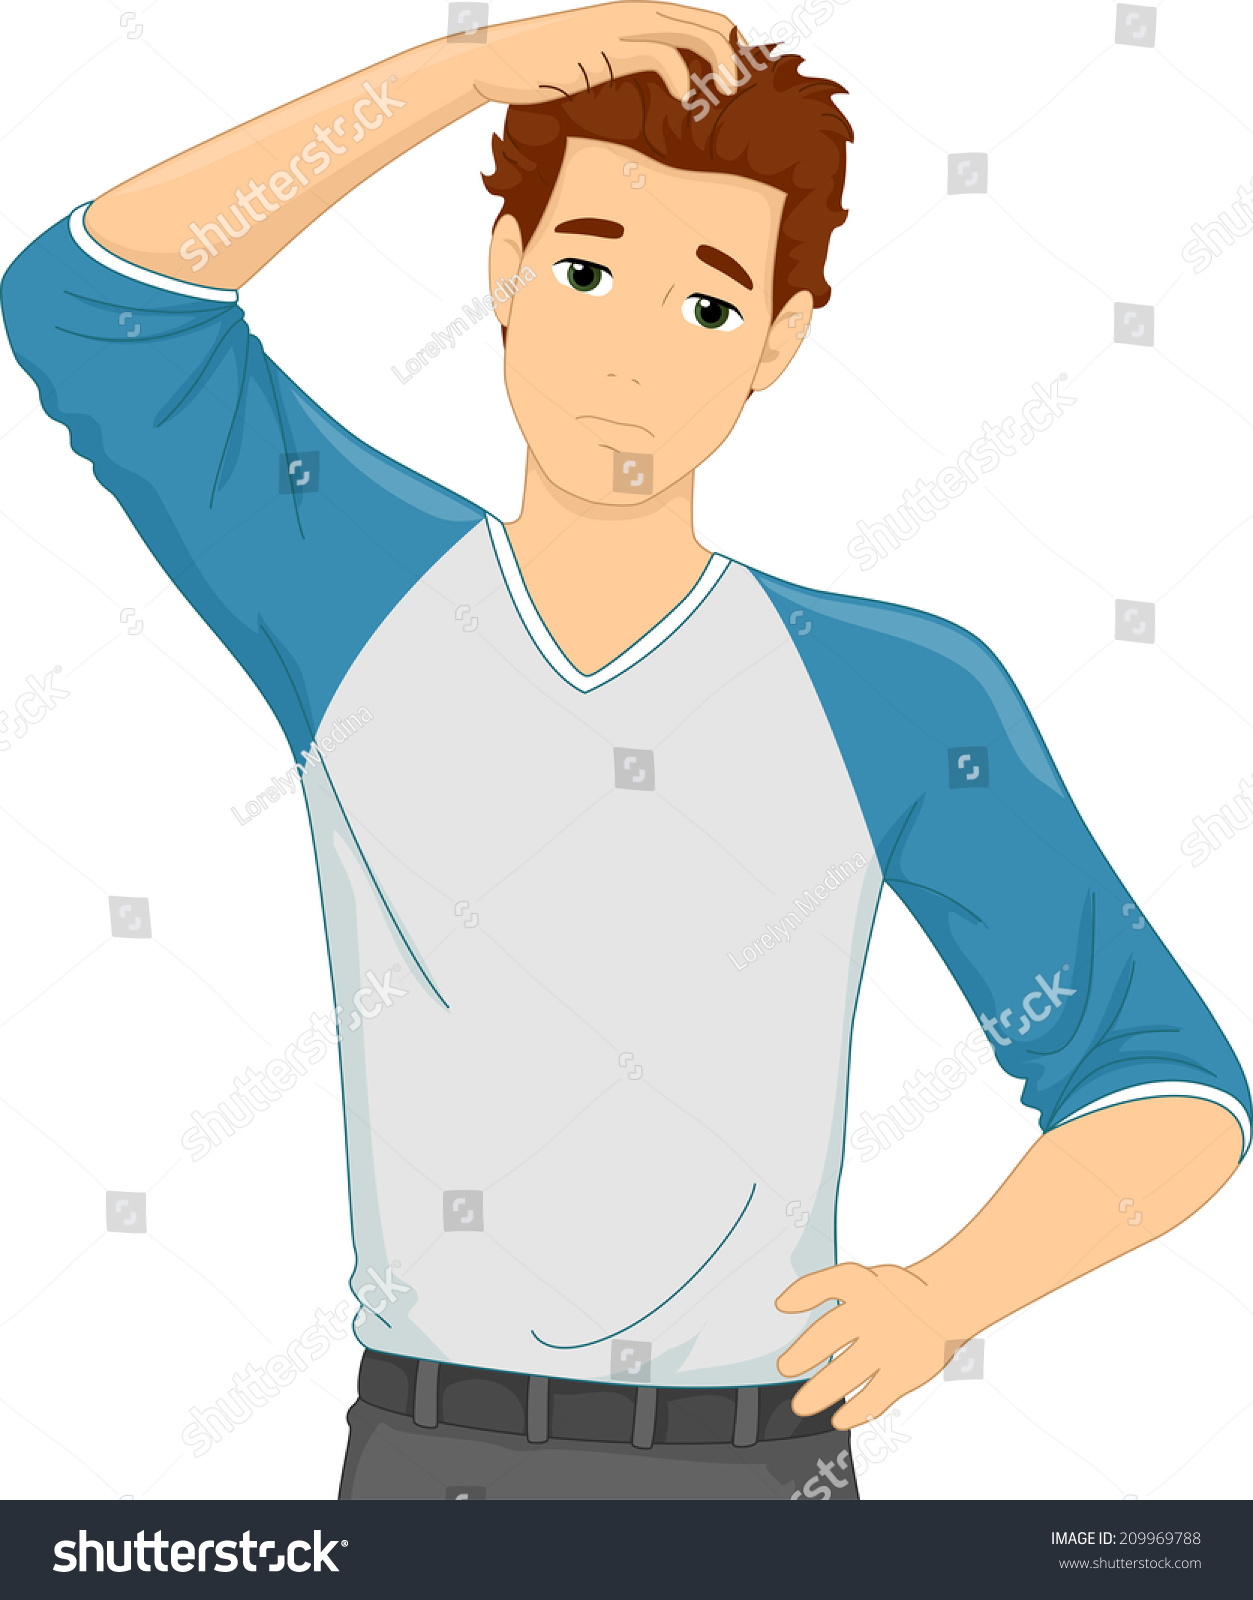 Illustration Man Scratching His Head Stock Vector Royalty Free 209969788 Shutterstock